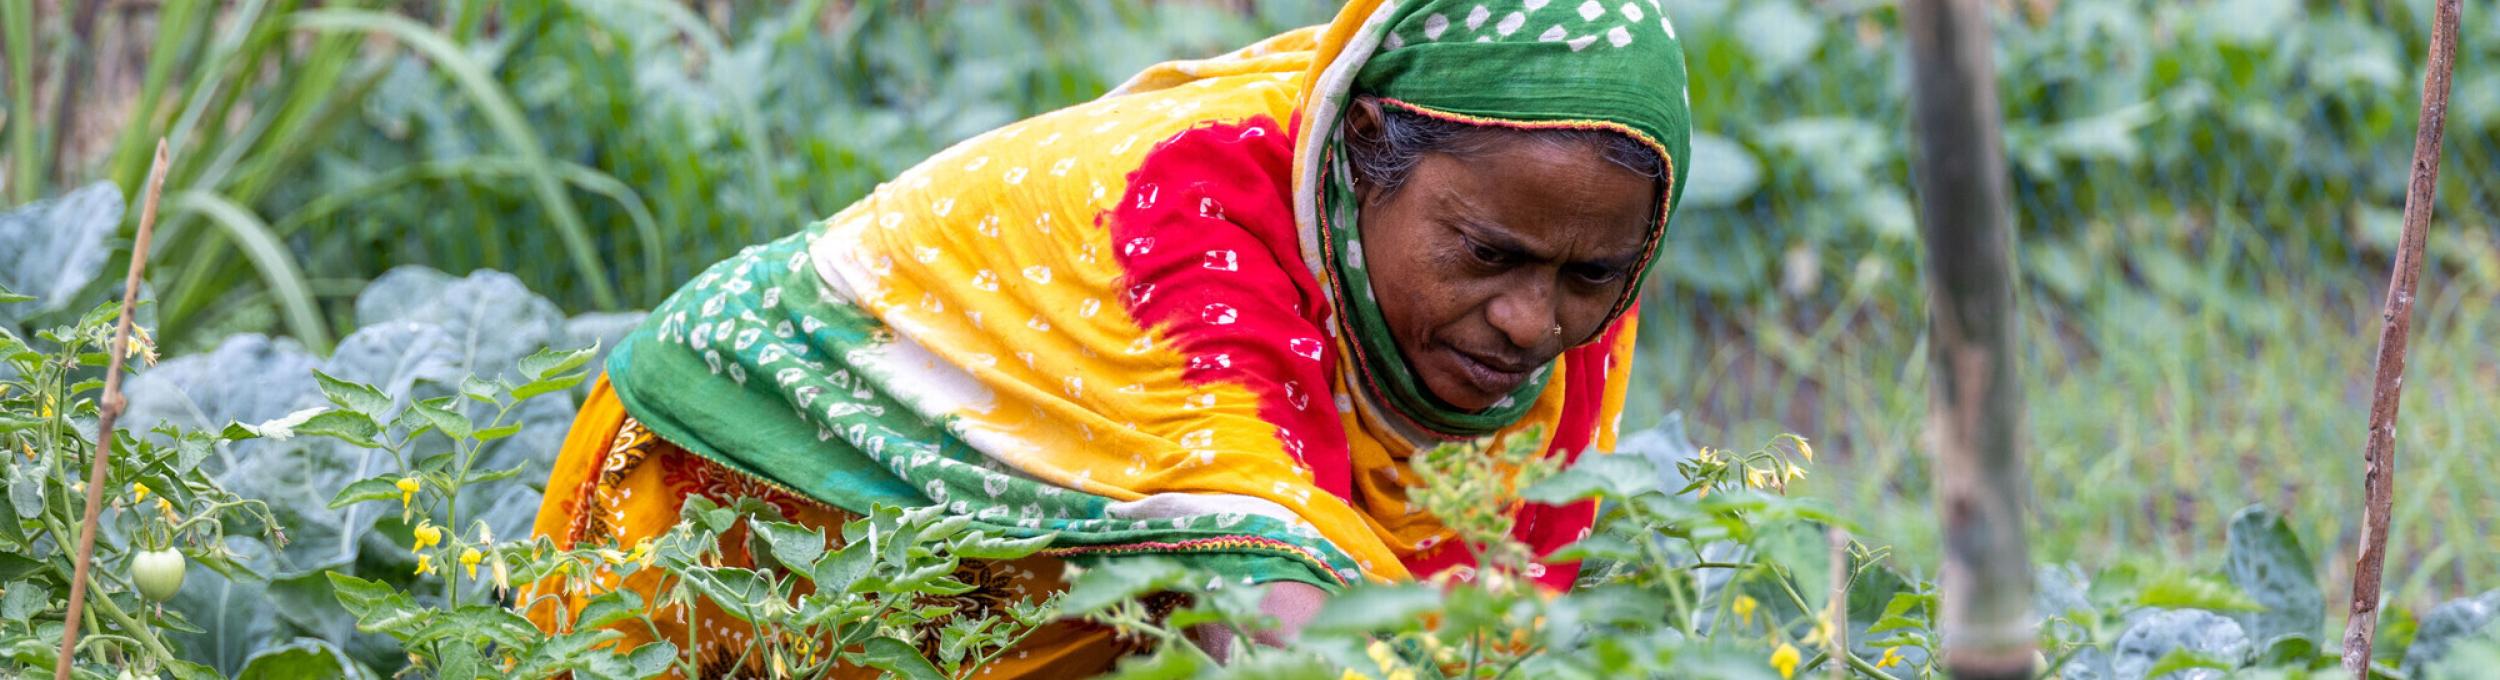 A Bangladeshi woman works in her garden